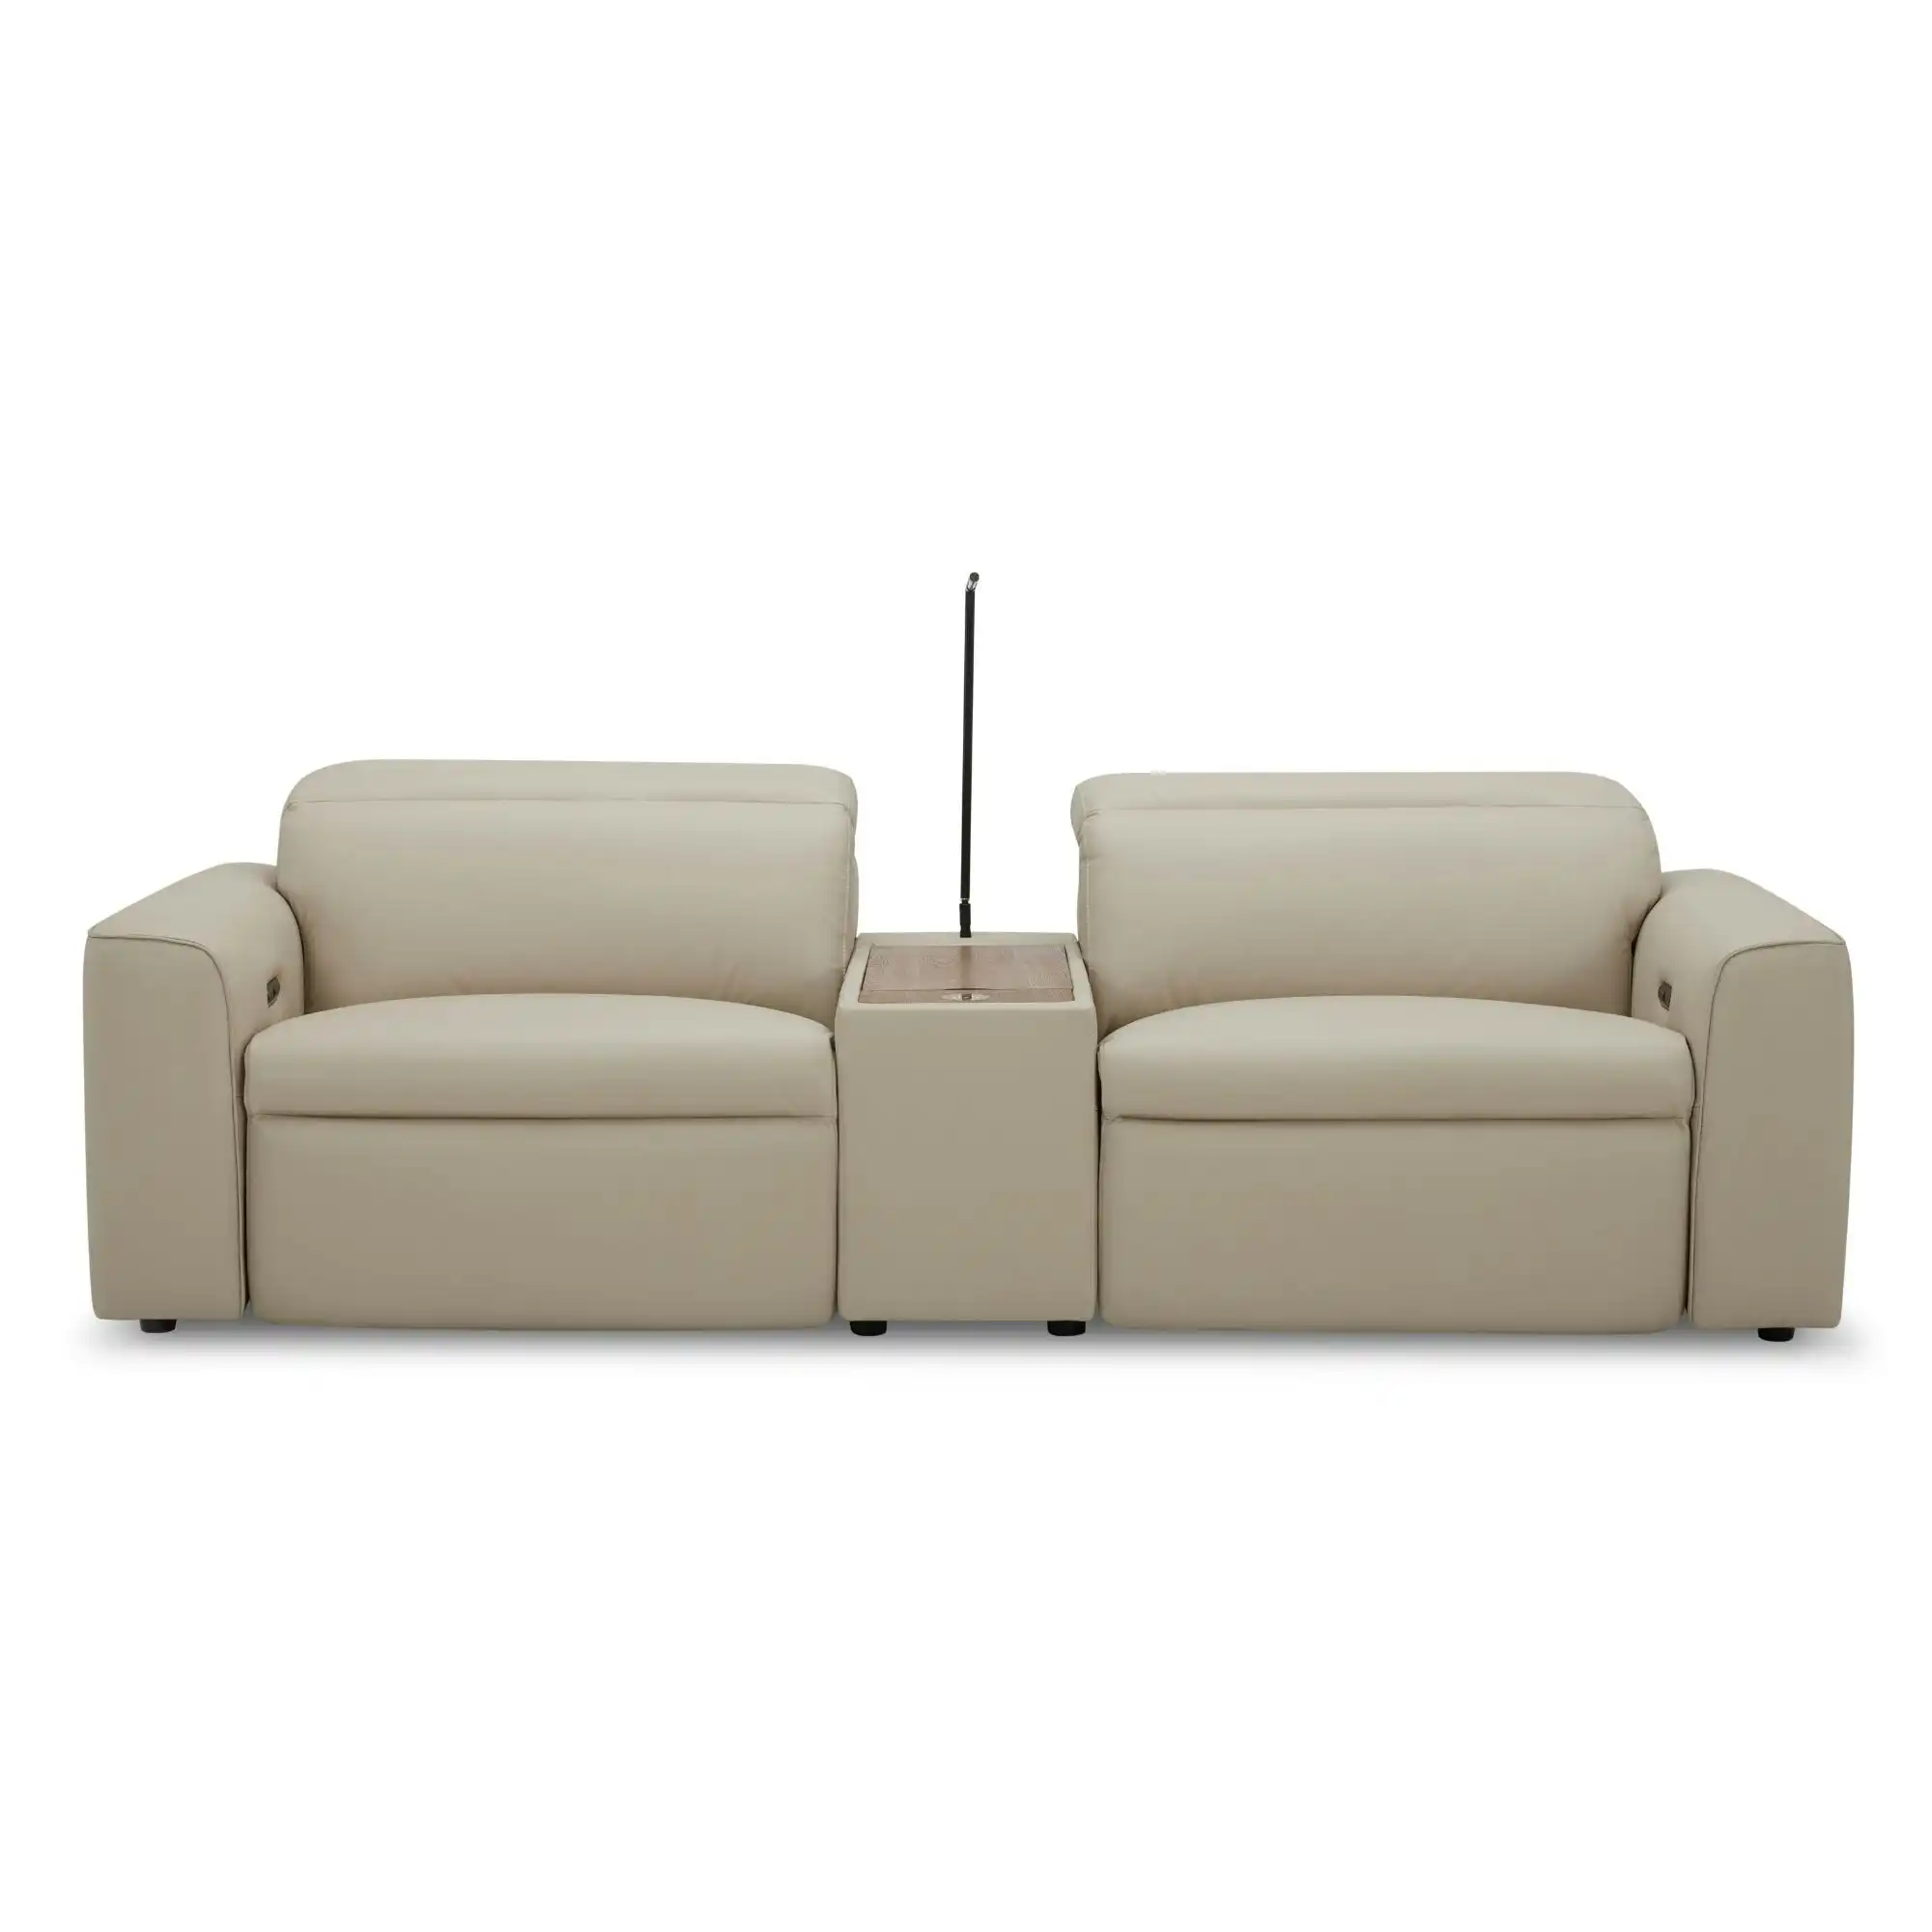 Hallie 2 Seater Leather Electric Recliner Sofa